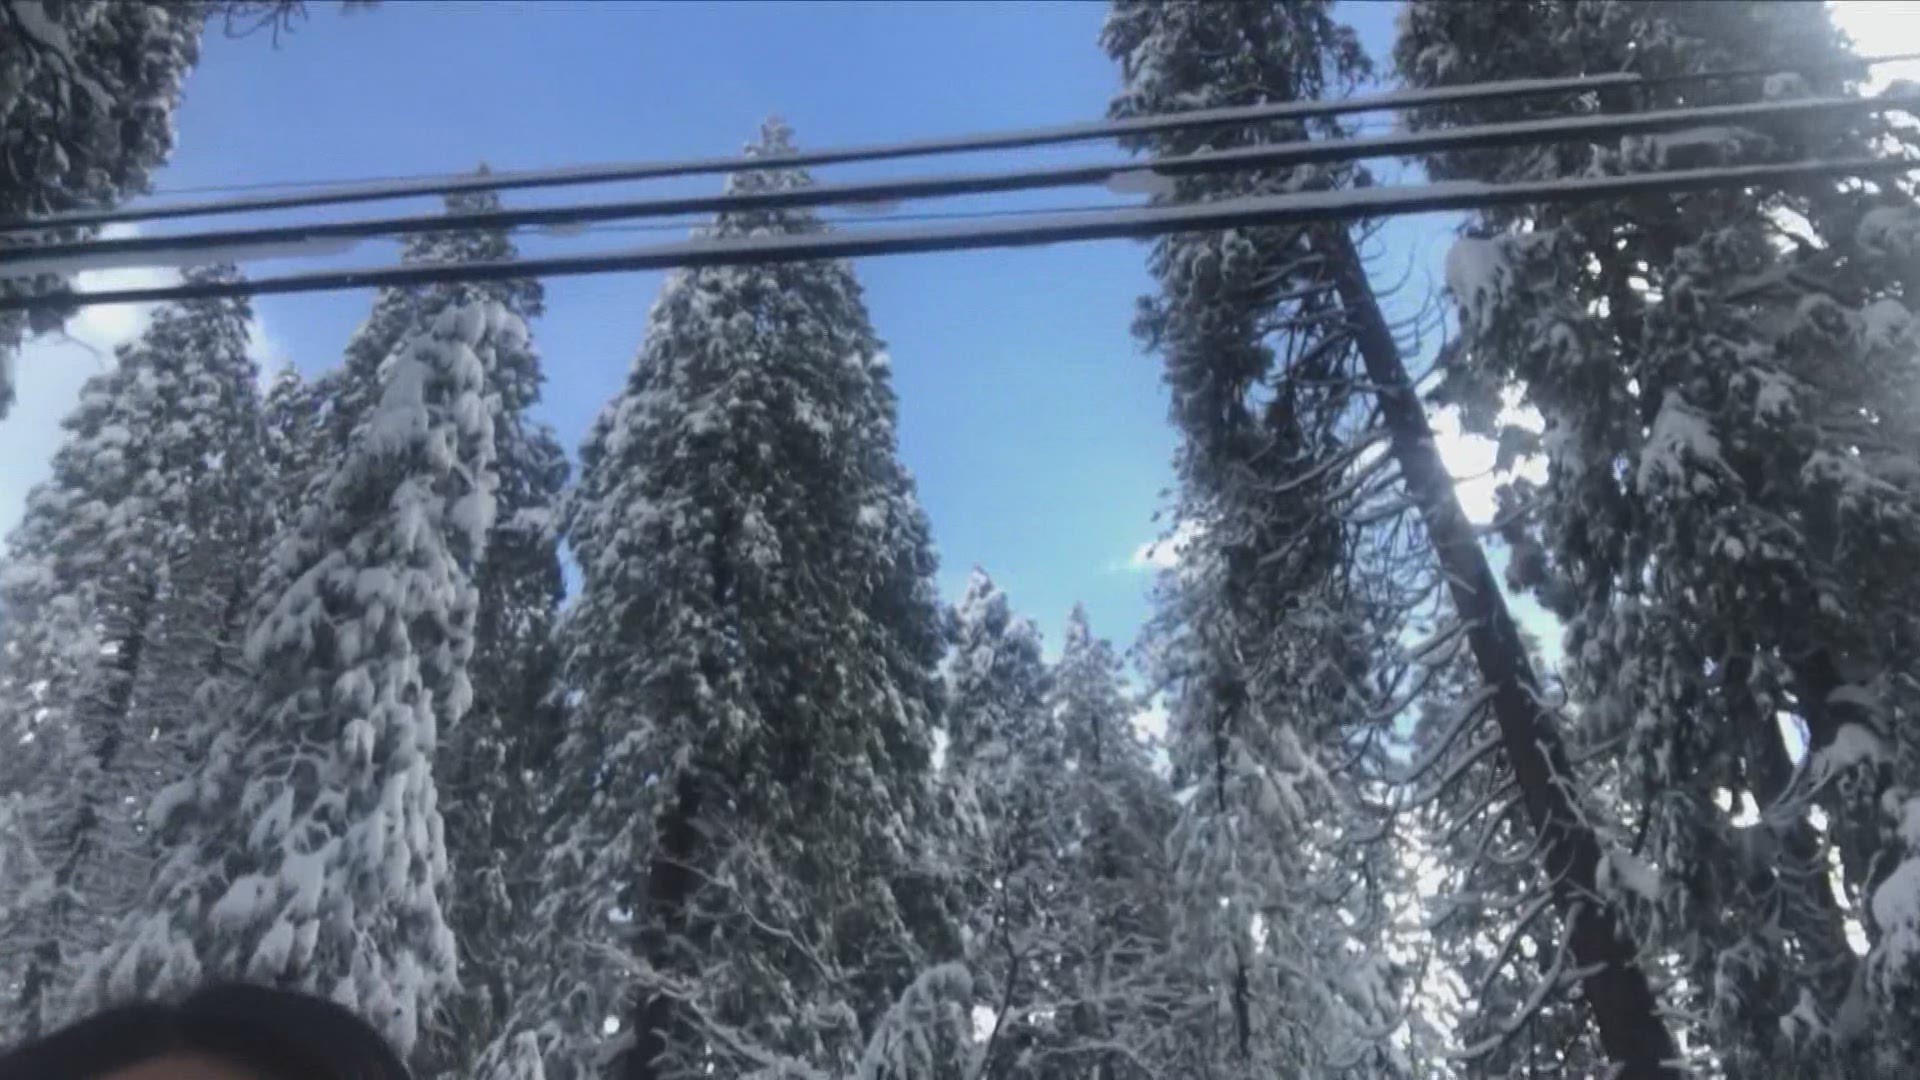 Thousands are without power in Pollock Pines, some since Monday, Feb. 4. ABC10's Daniela Pardo is there with the latest updates.